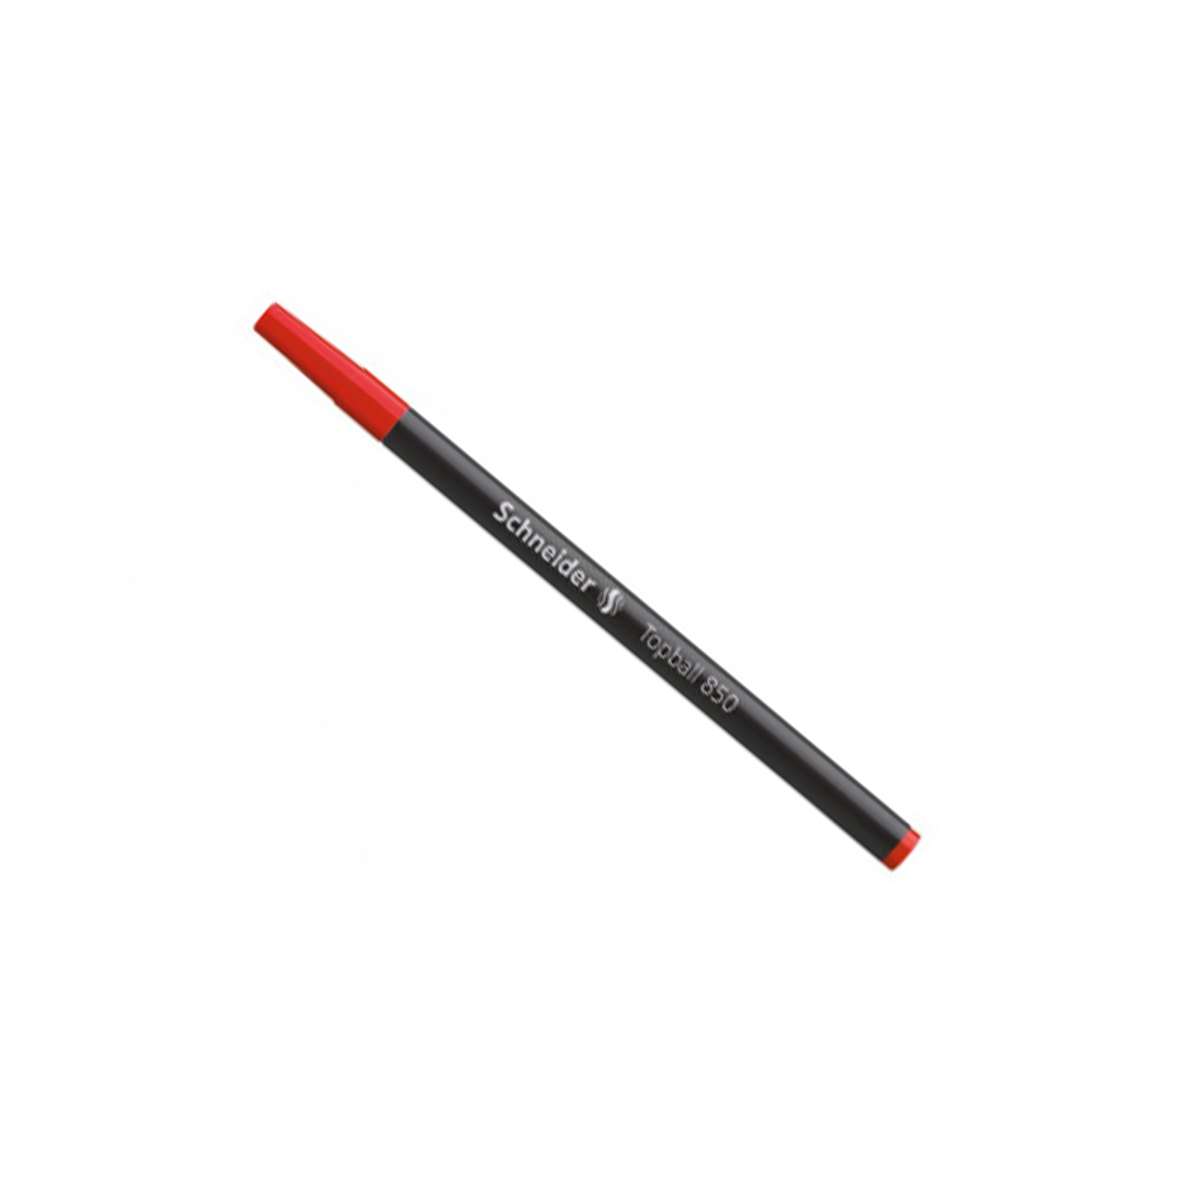 schneider Topball 850 : Model 71609 red color Writing Roller Ball refill  0.5mm